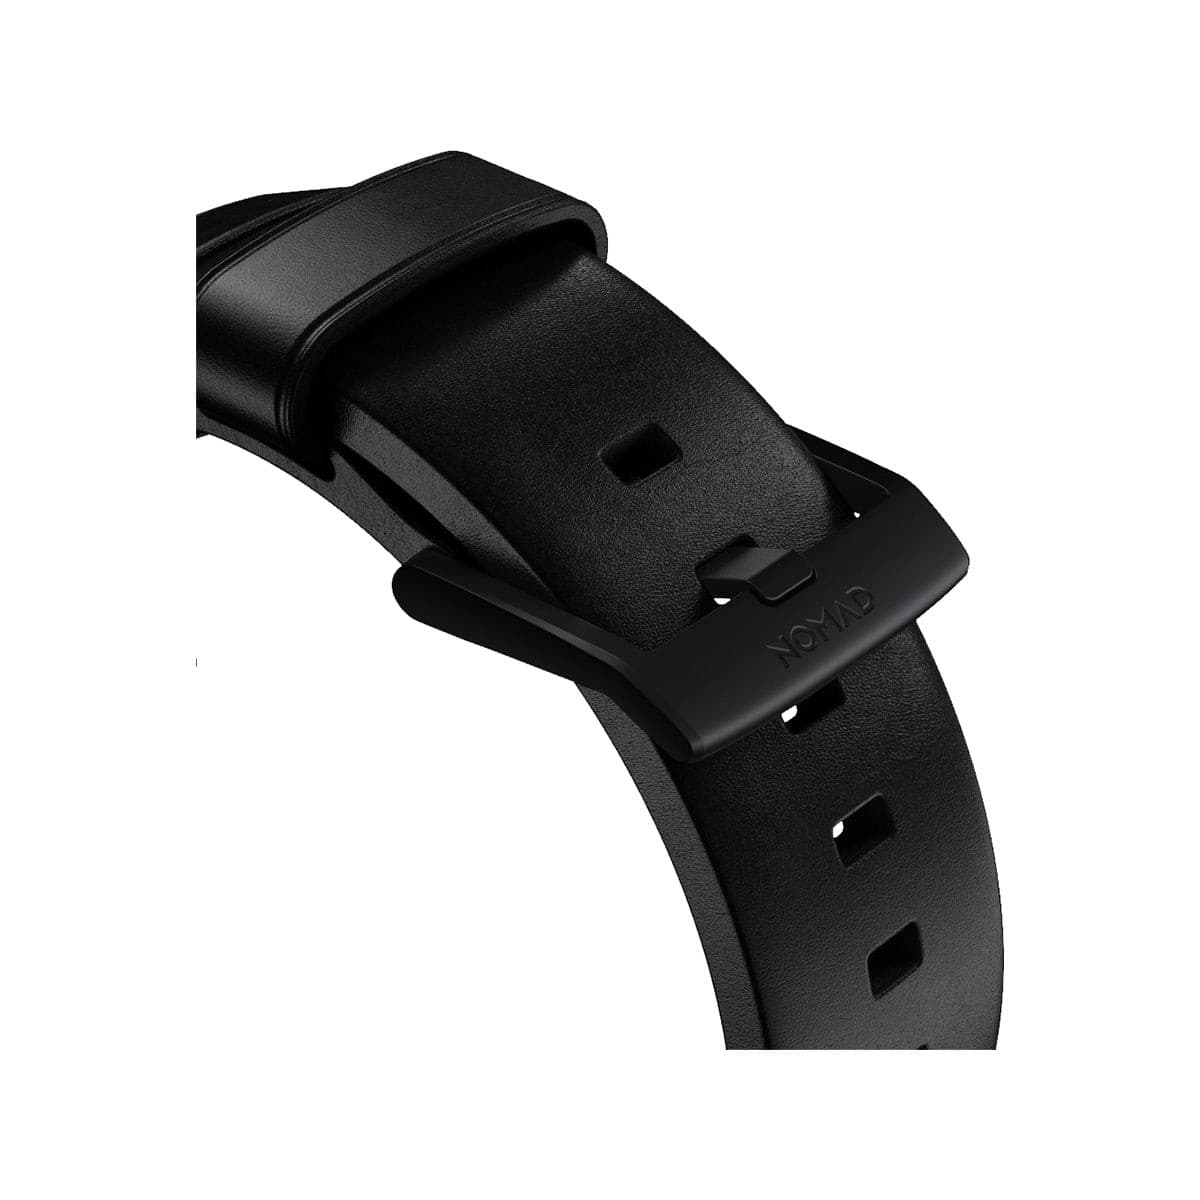 NOMAD Apple Watch Modern Band 45mm - Black Hardware with Black Horween Leather Strap.